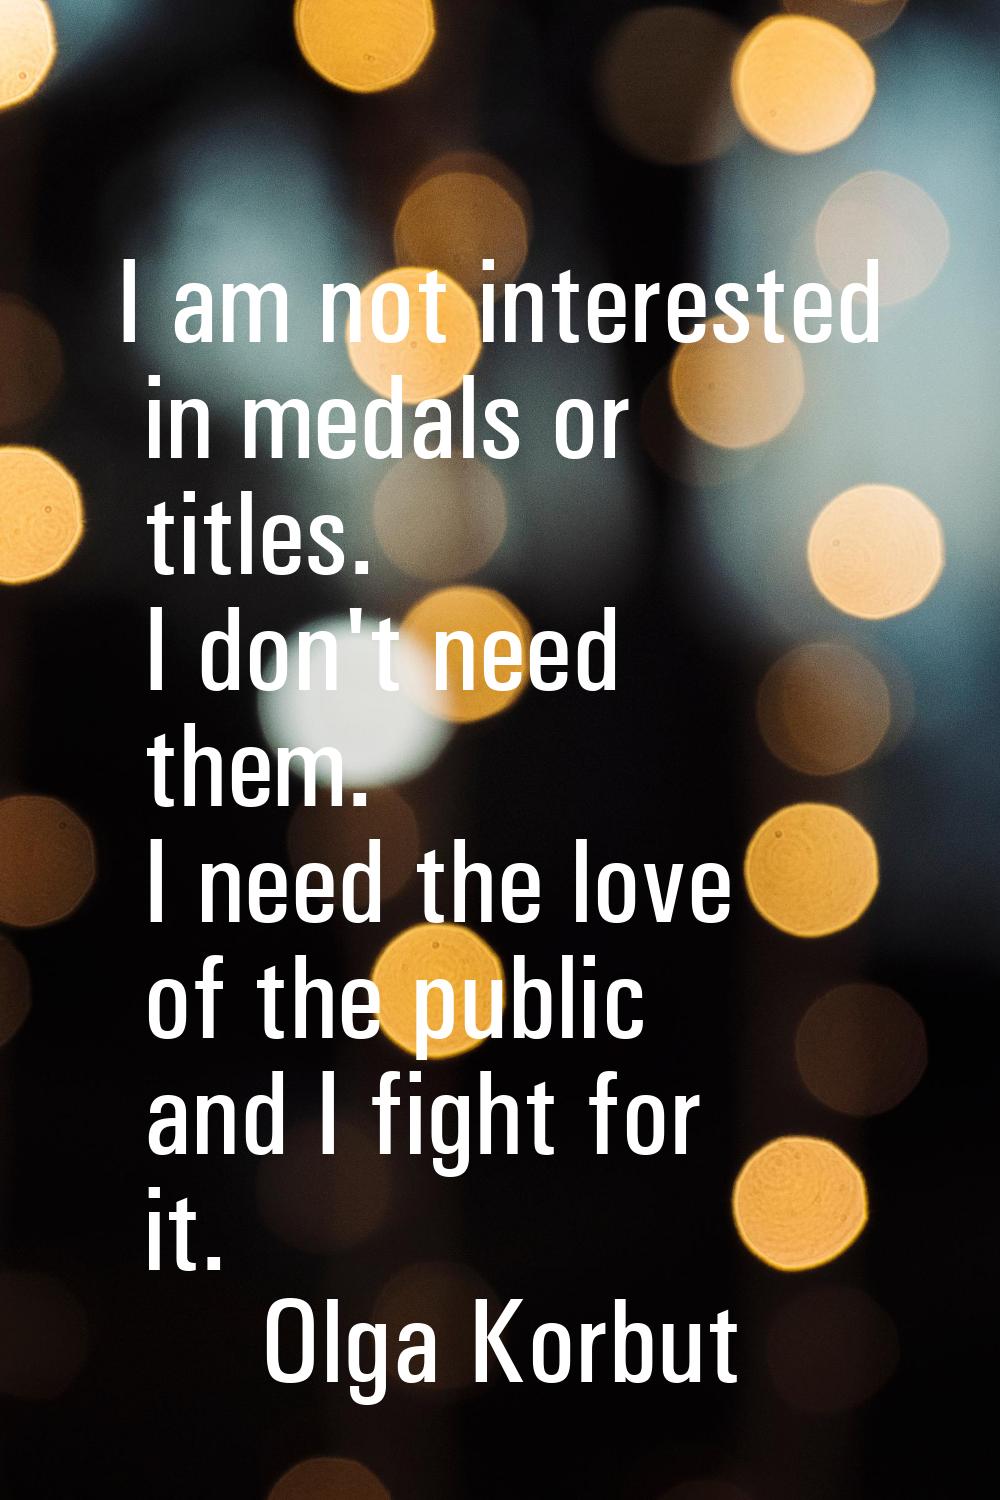 I am not interested in medals or titles. I don't need them. I need the love of the public and I fig